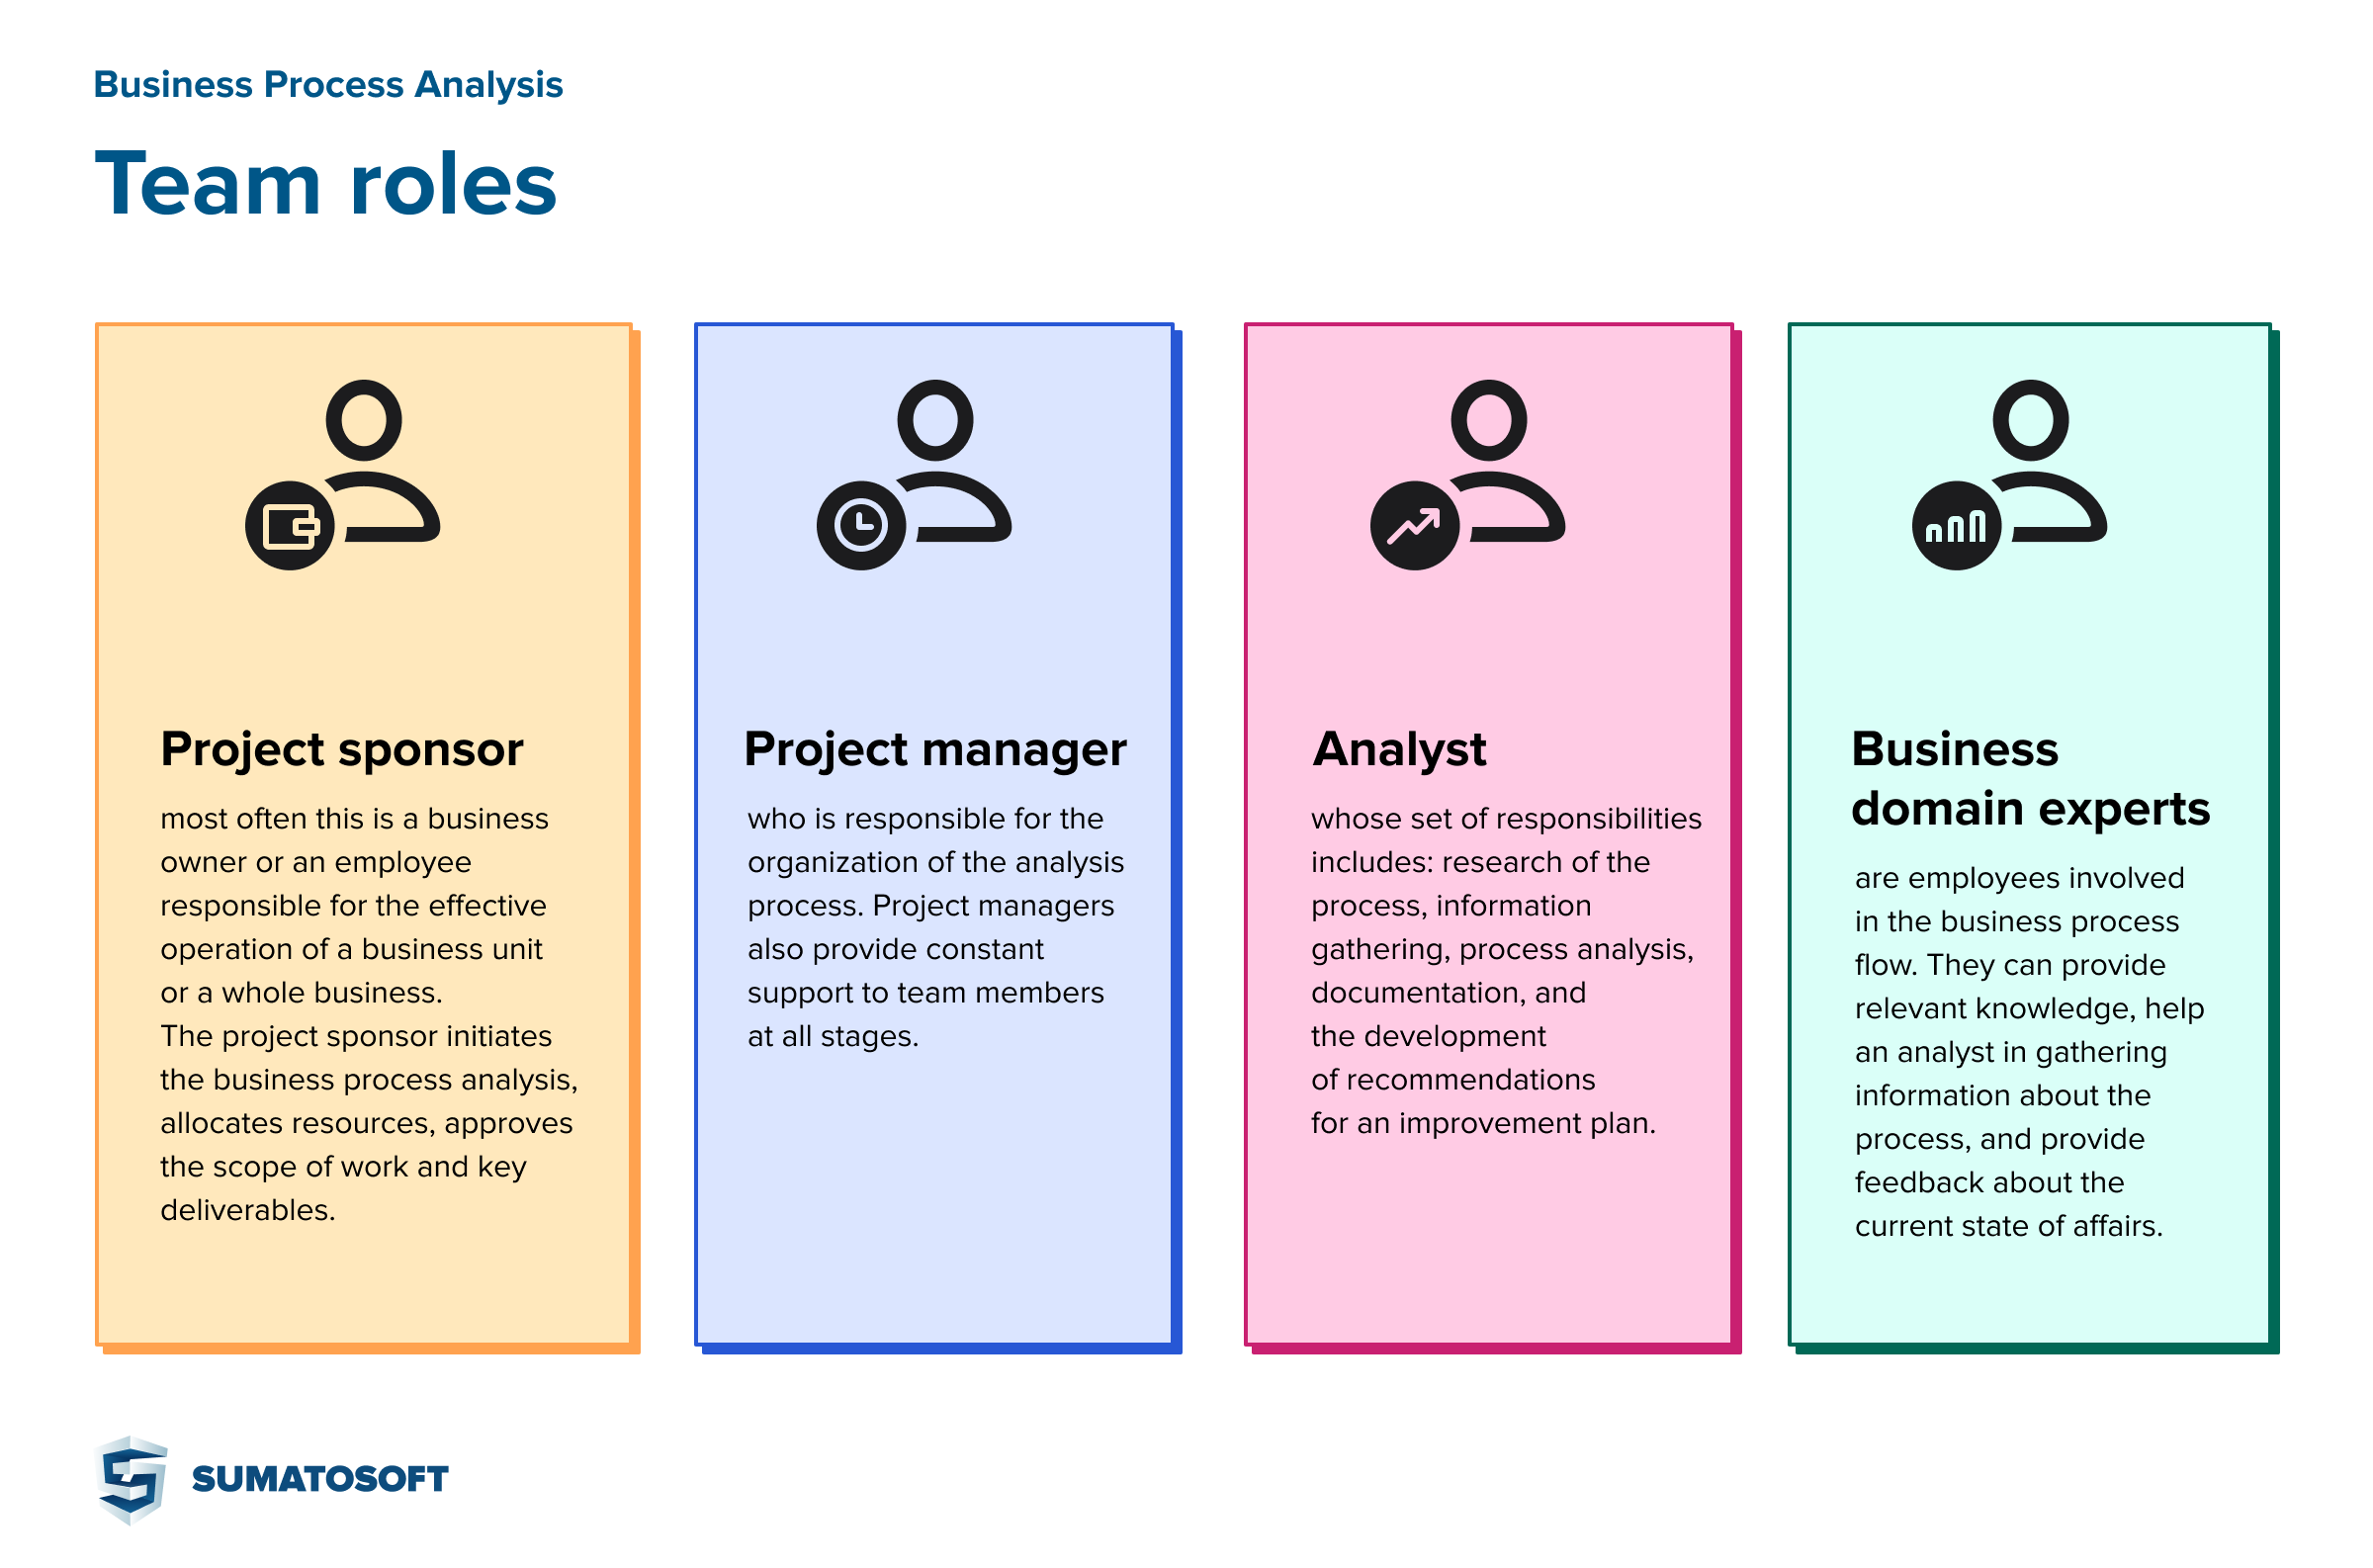 business Process Analysis - team roles